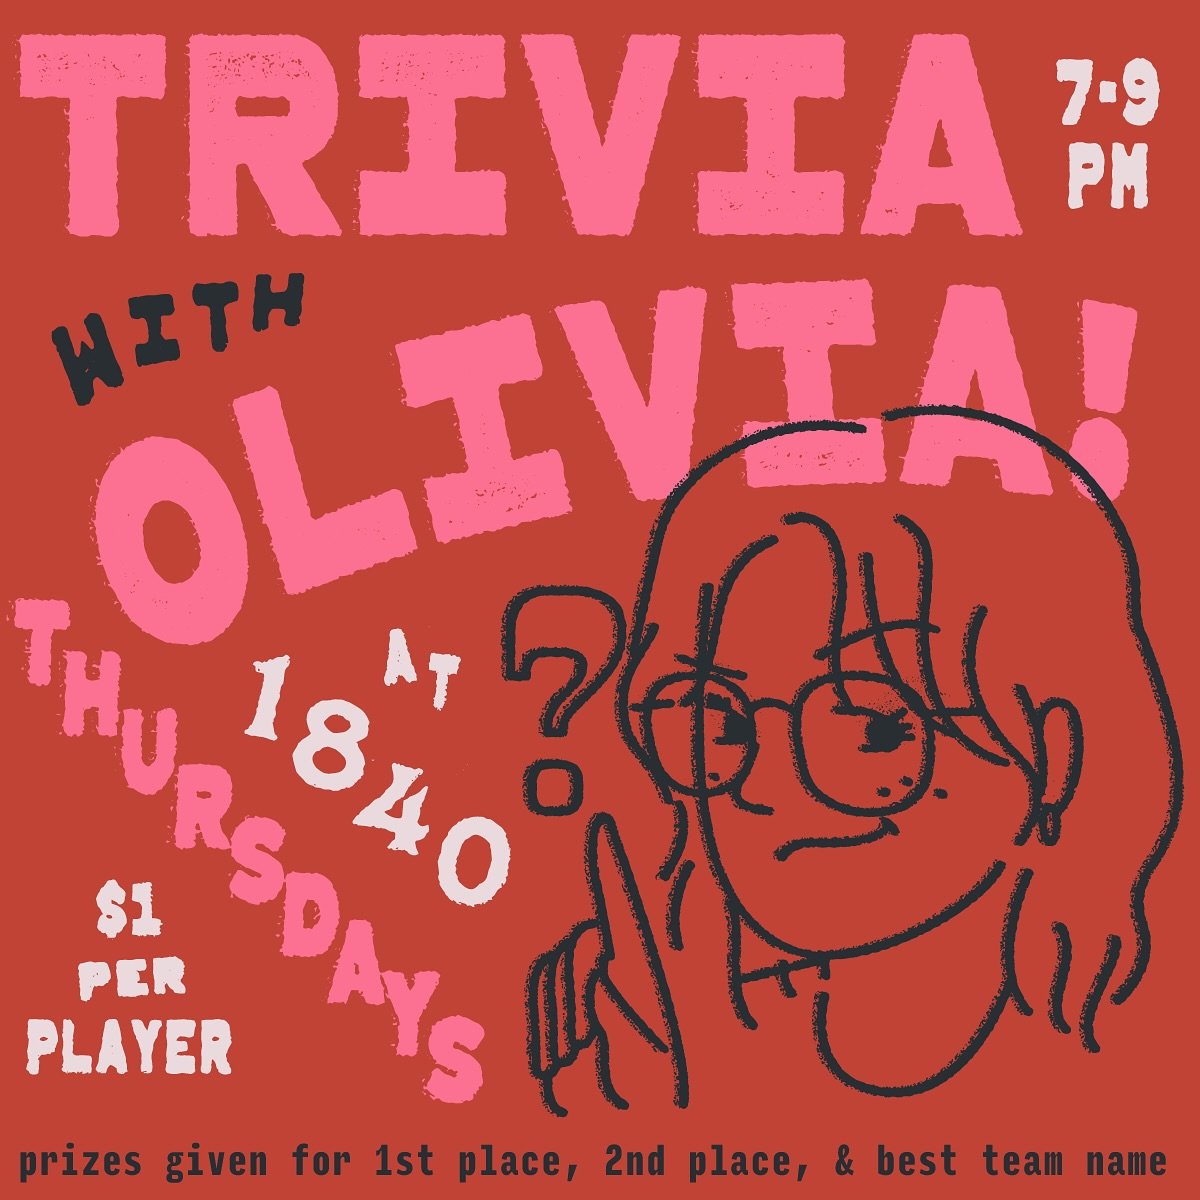 𝐓𝐫𝐢𝐯𝐢𝐚 𝐰𝐢𝐭𝐡 𝐎𝐥𝐢𝐯𝐢𝐚 is back! Olivia&rsquo;s got some question categories that she&rsquo;s carefully curated to stump the best of you. Every Thursday, bring your friends and enjoy a new set of brain stumpers. 

*hint hint* - keep an eye